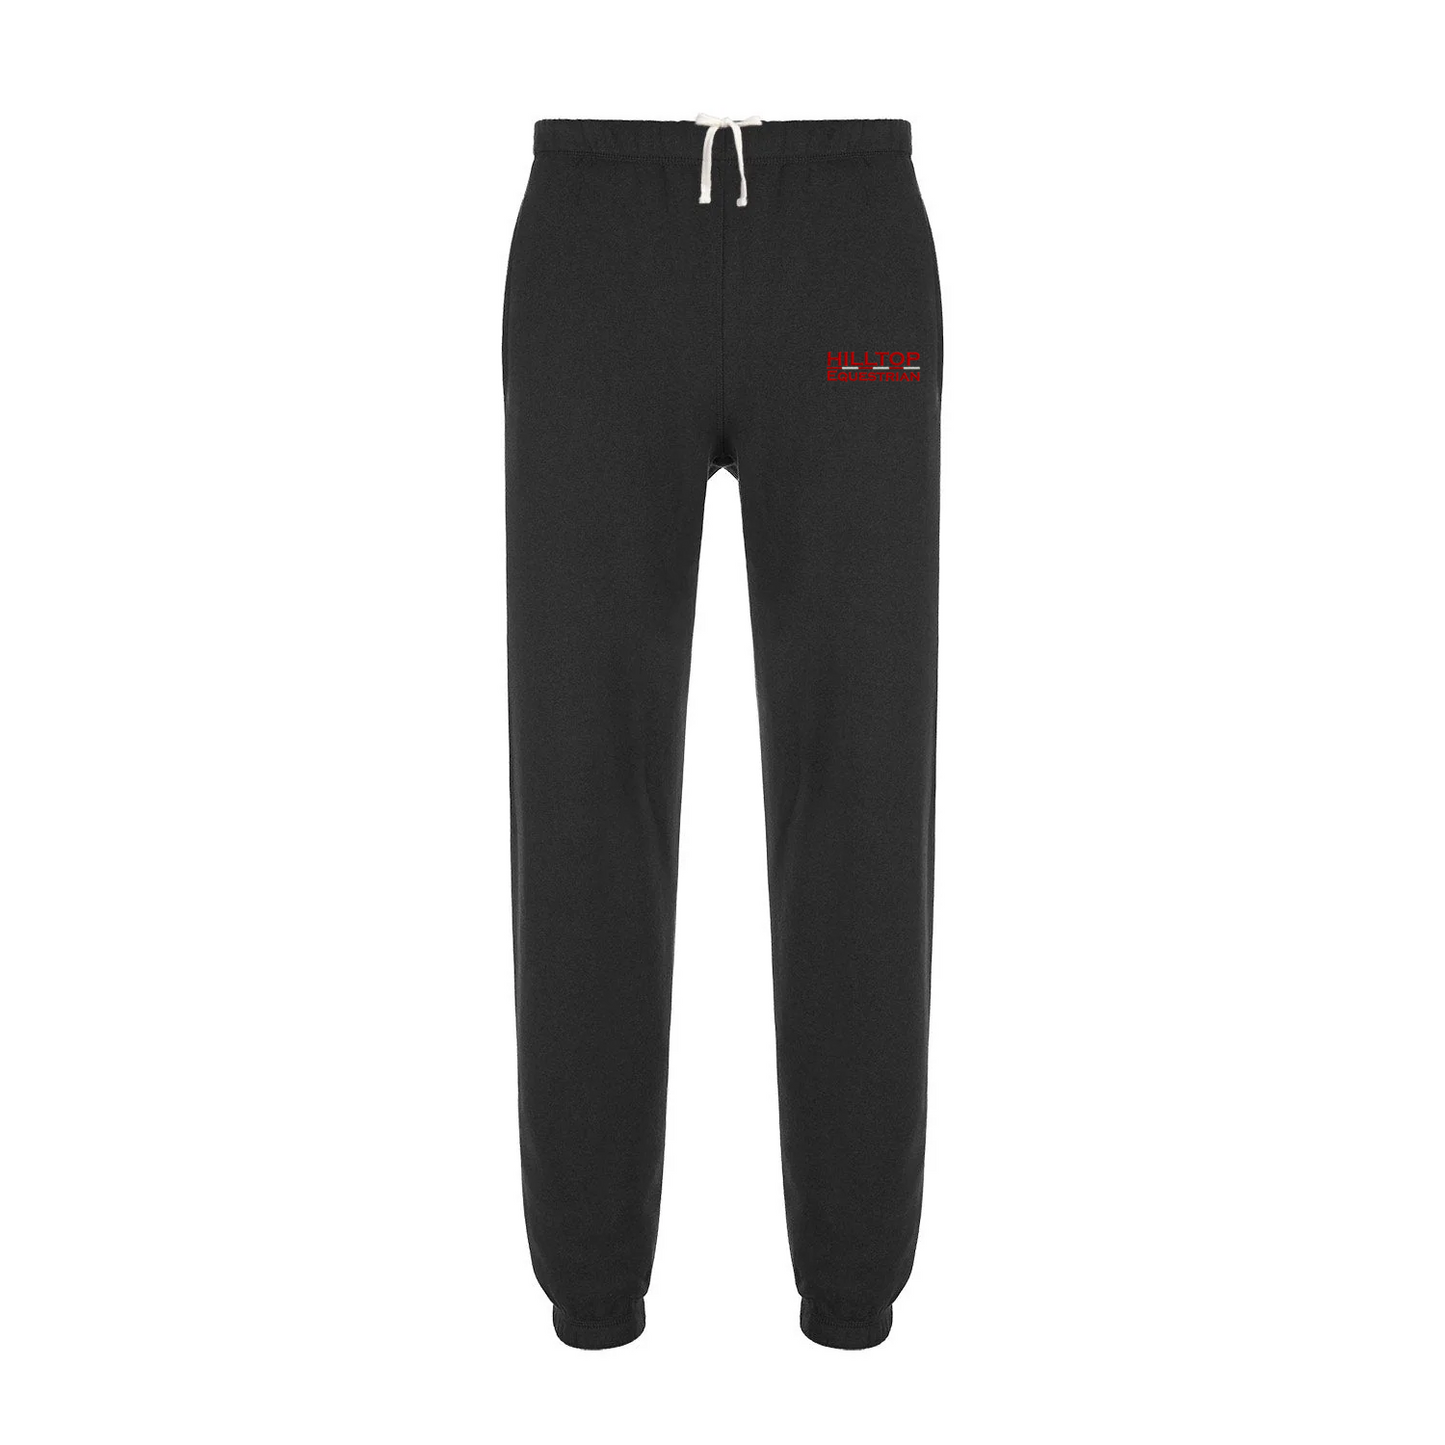 Hilltop Equestrian - Embroidered Women's Sweat Pants